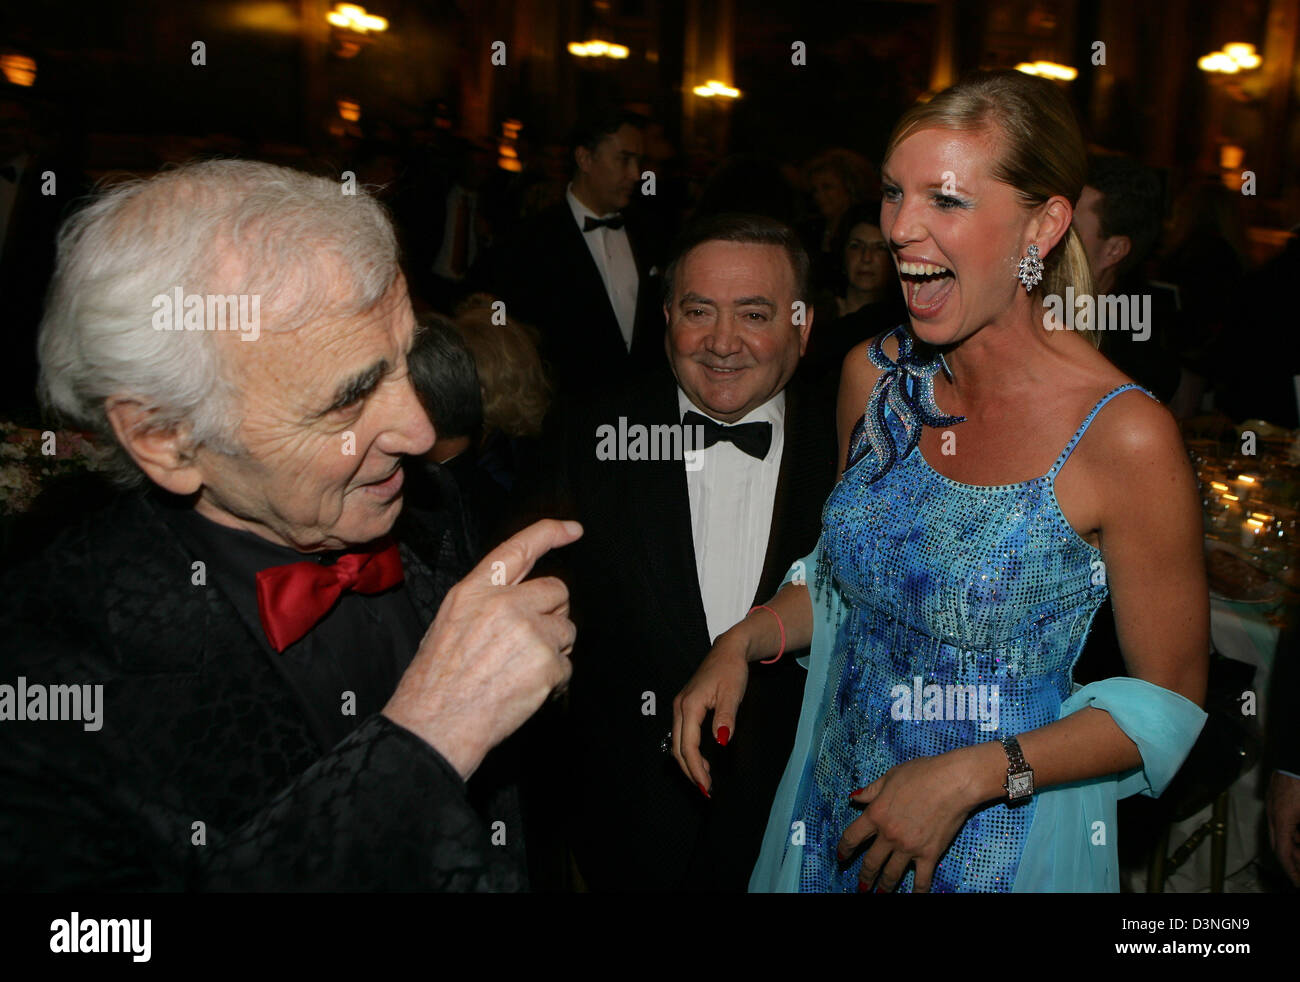 Charles Aznavour (L) and Princess Maja of Hohenzollern photograhed laughing at the event 'Soiree de Gala au Chateau de Versailles', Versailles, France, Monday 30.01.2006. The proceeds of the gala will be donated to the French cancer foundation AVEC. The event featured a performance by Charles Aznavour in the opera and a festive meal in the Galerie des Batailles of Castle Versailles Stock Photo